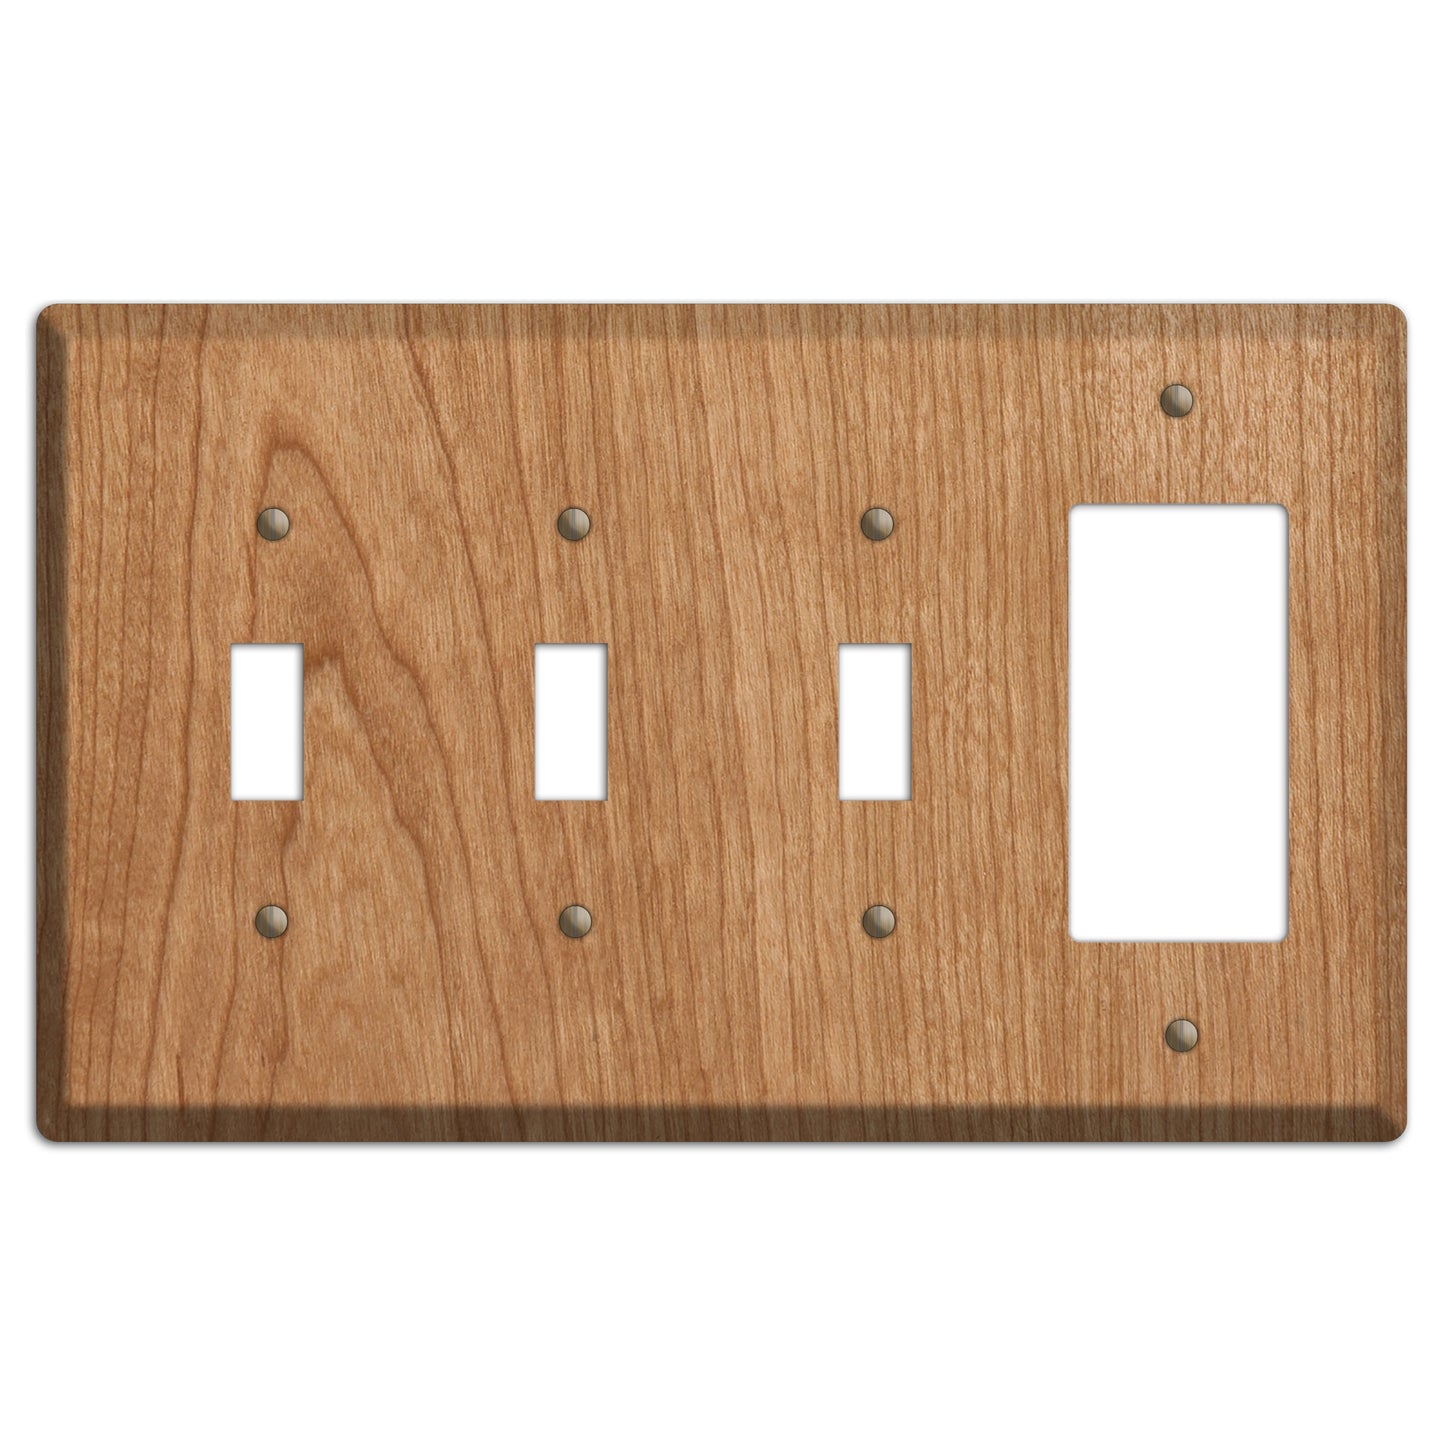 Unfinished Cherry Wood 3 Toggle / Rocker Outlet Cover Plate